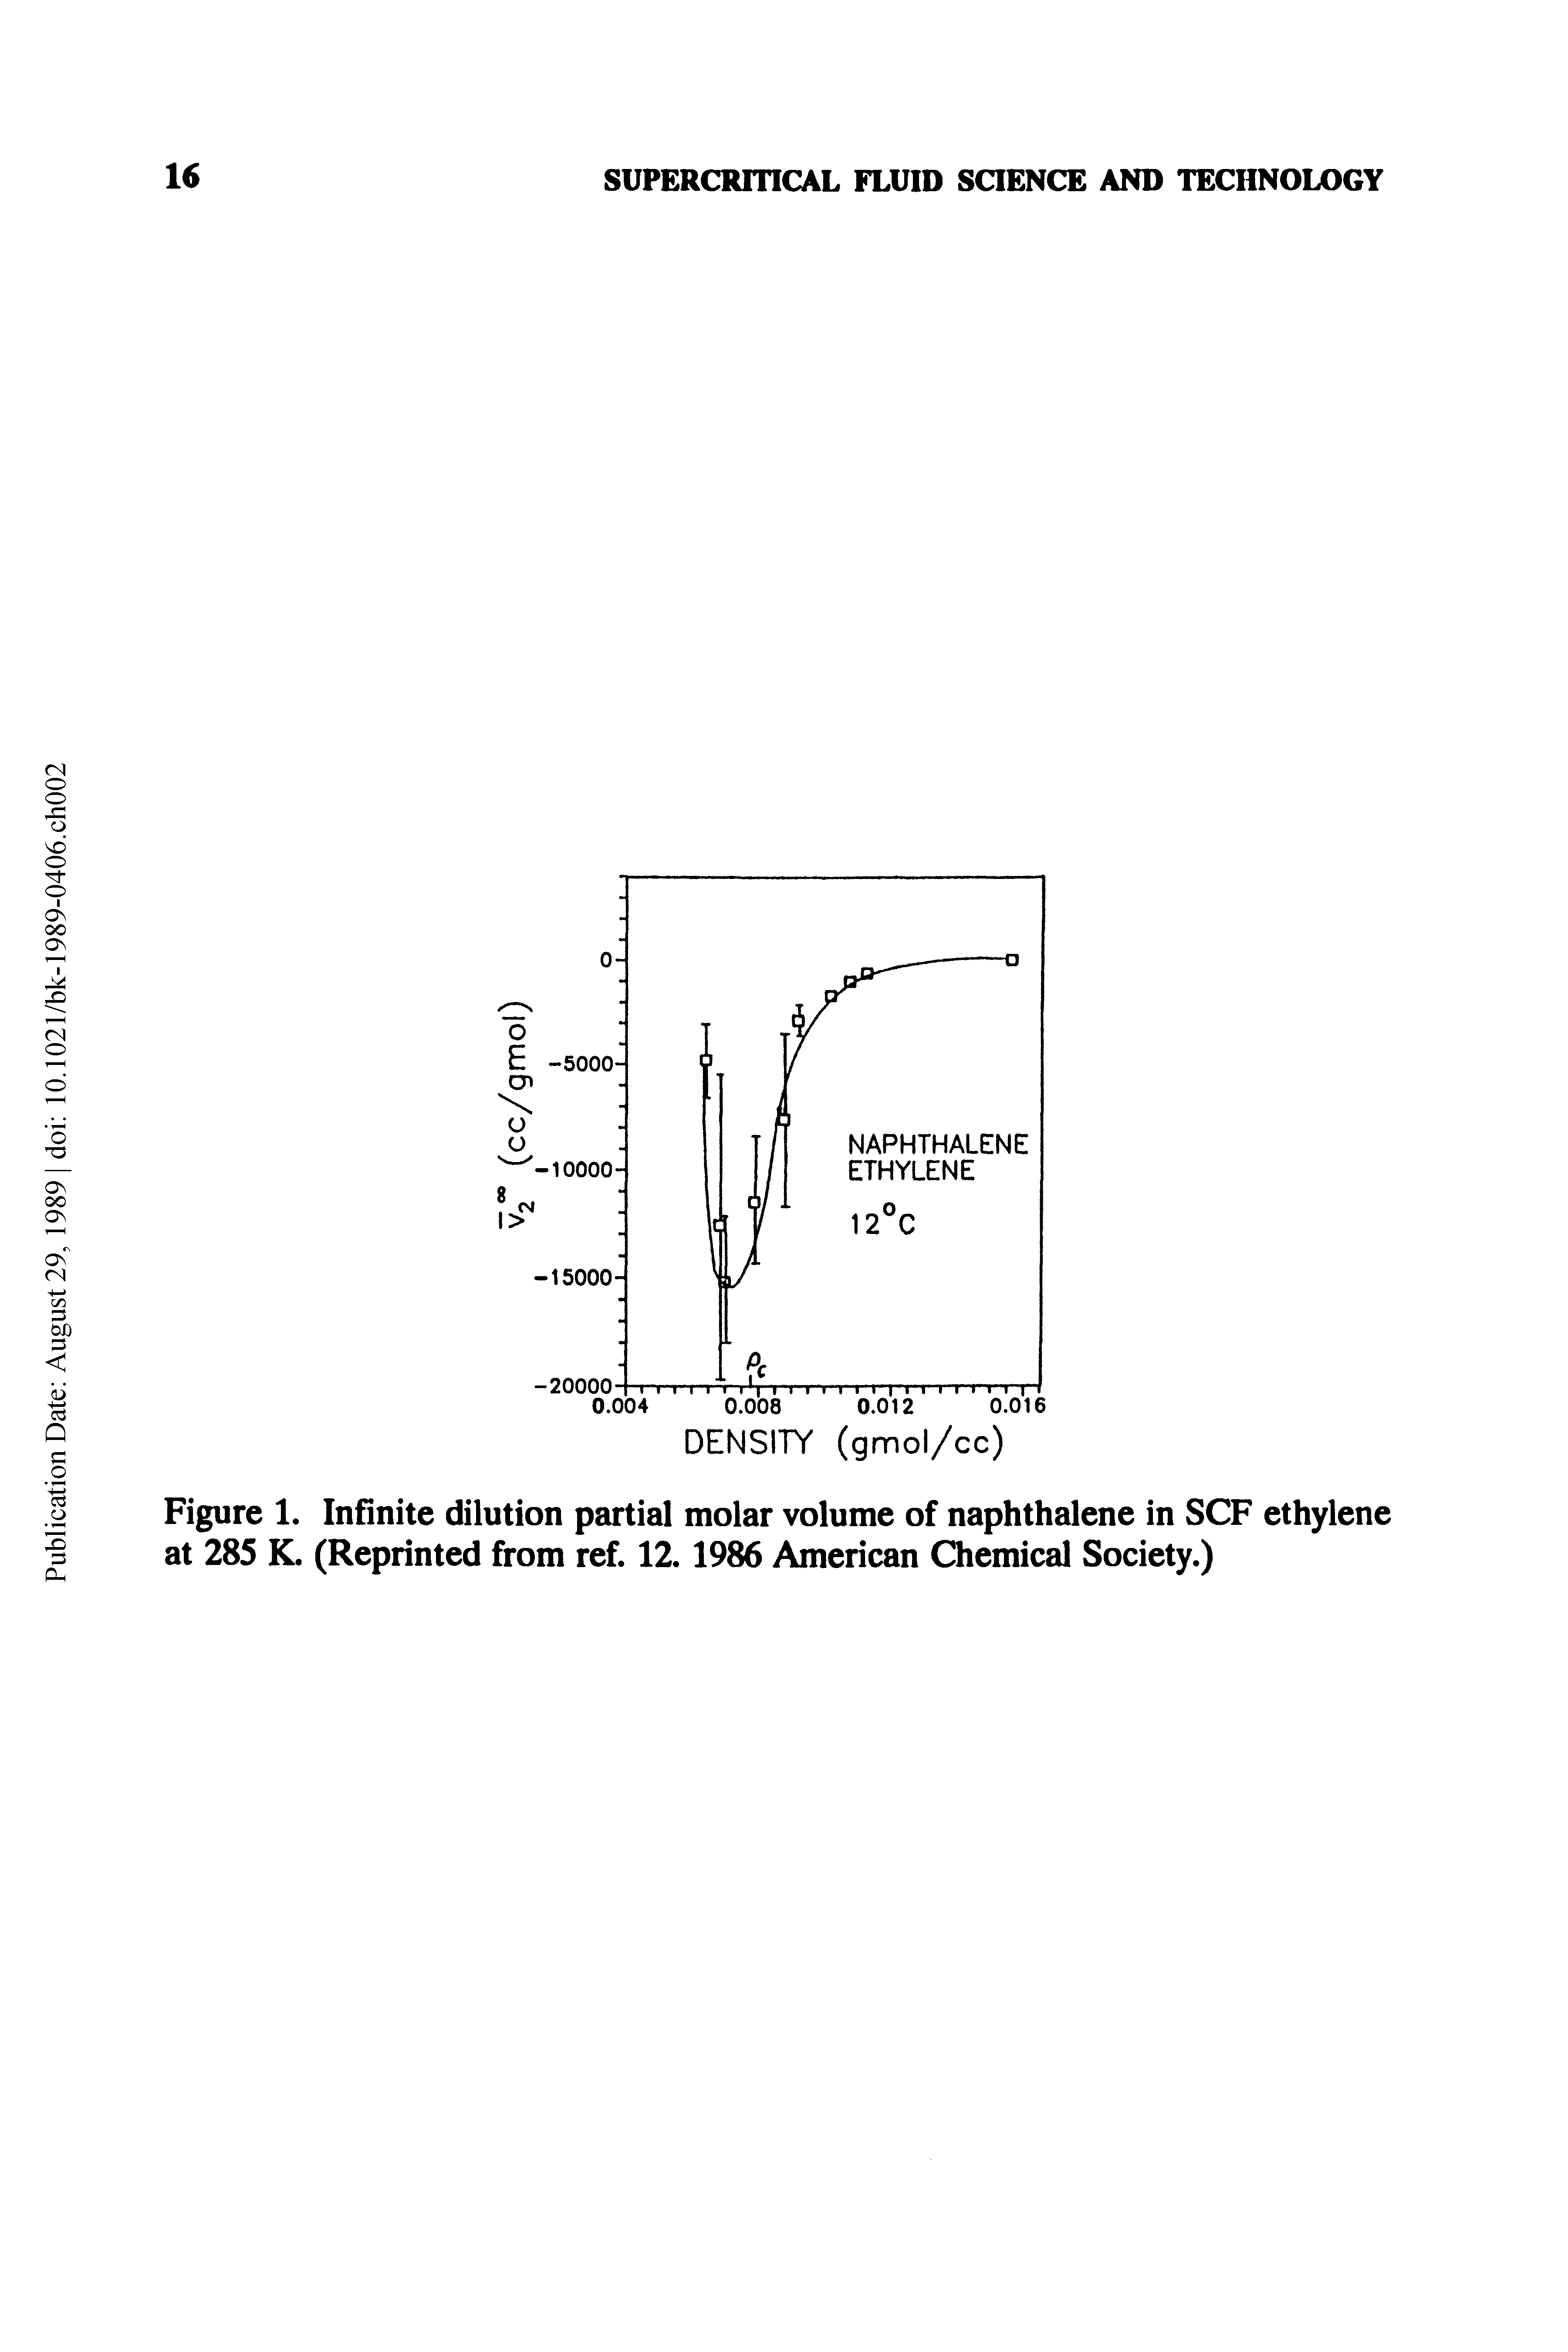 Figure 1. Infinite dilution partial molar volume of naphthalene in SCF ethylene at 285 K. (Reprinted from ref. 12.1986 American Chemical Society.)...